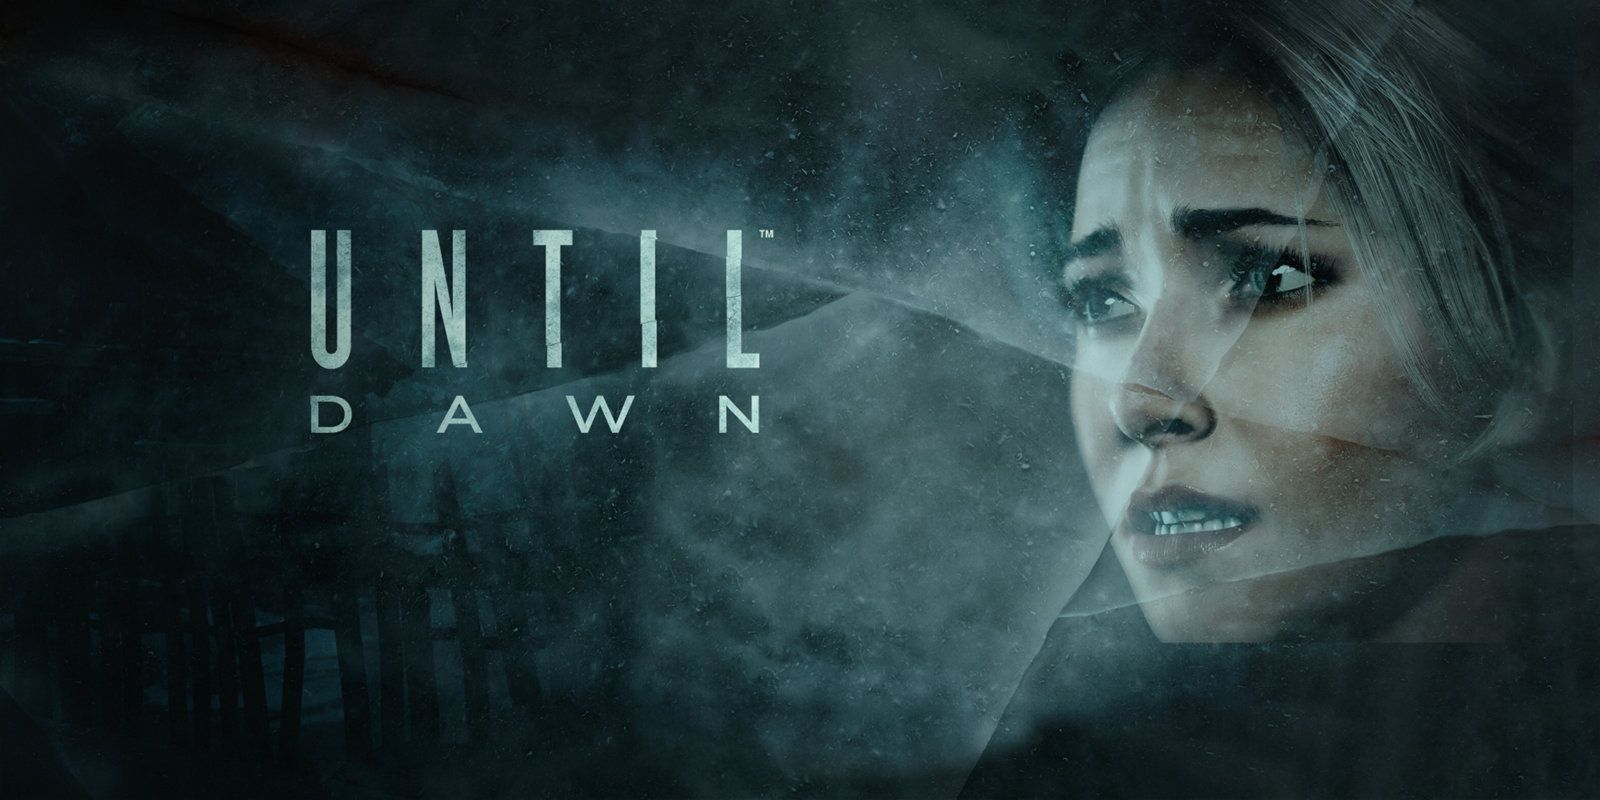 A scared woman next to the Until Dawn title card